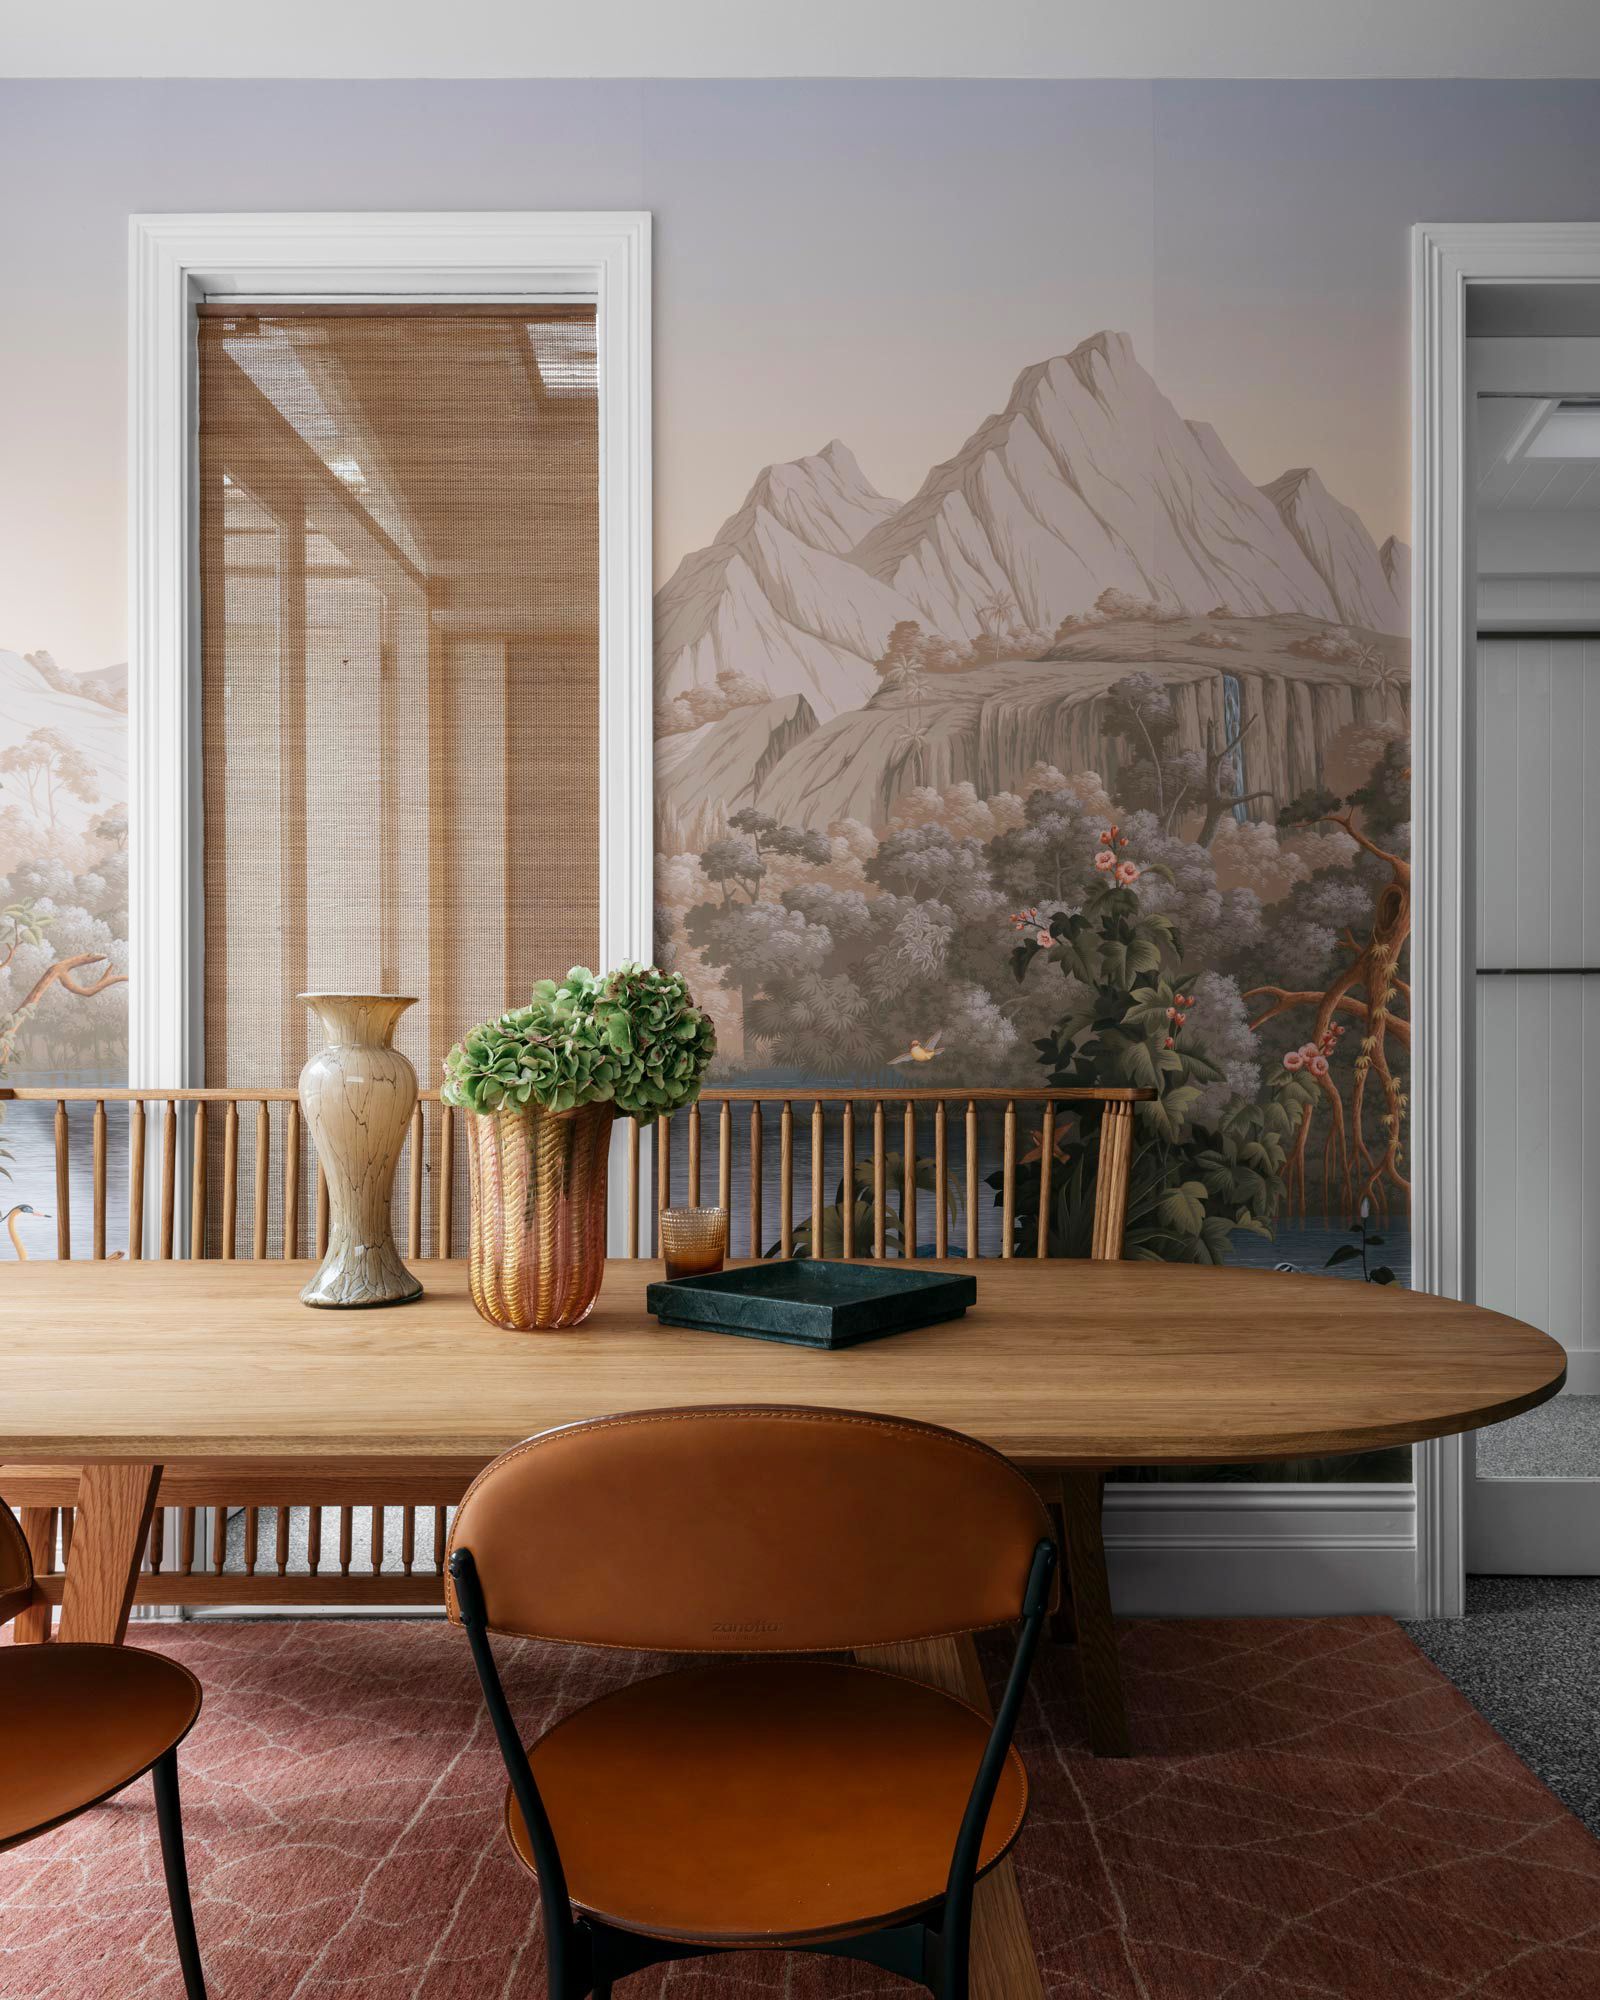 23 Dining Room Wallpaper Ideas You Need to Consider